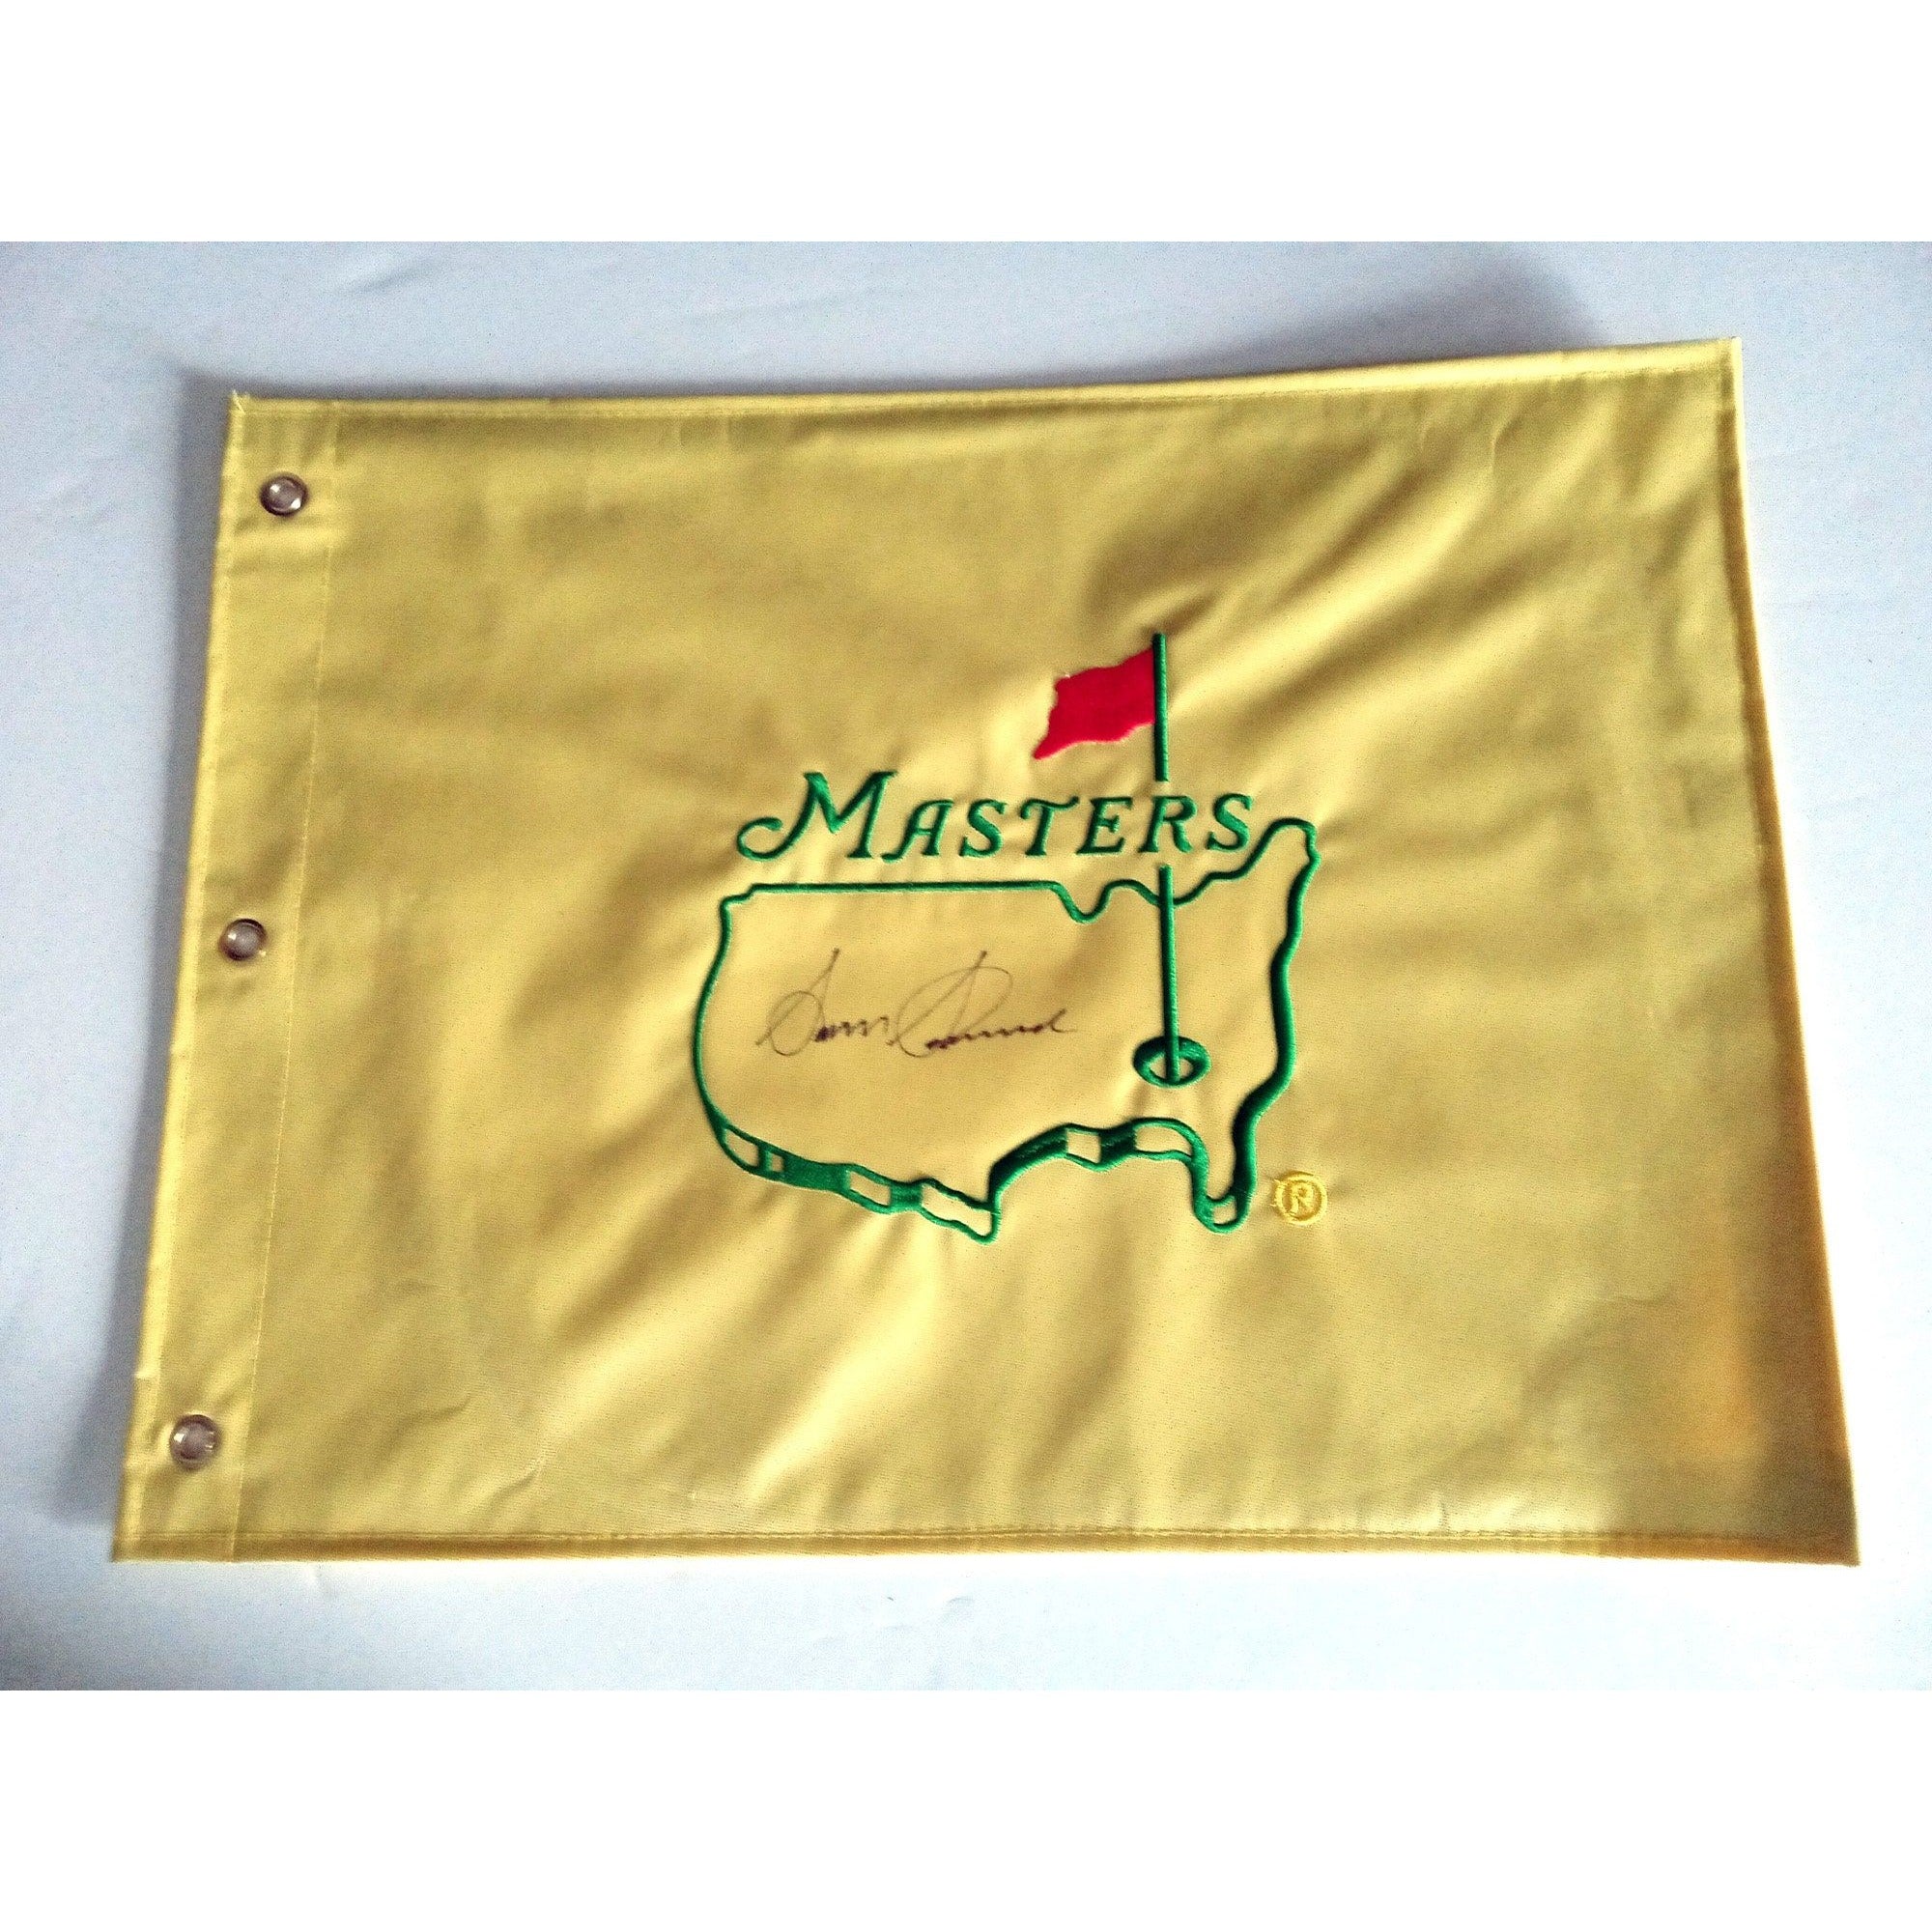 Sam Snead Masters Golf flag signed with proof